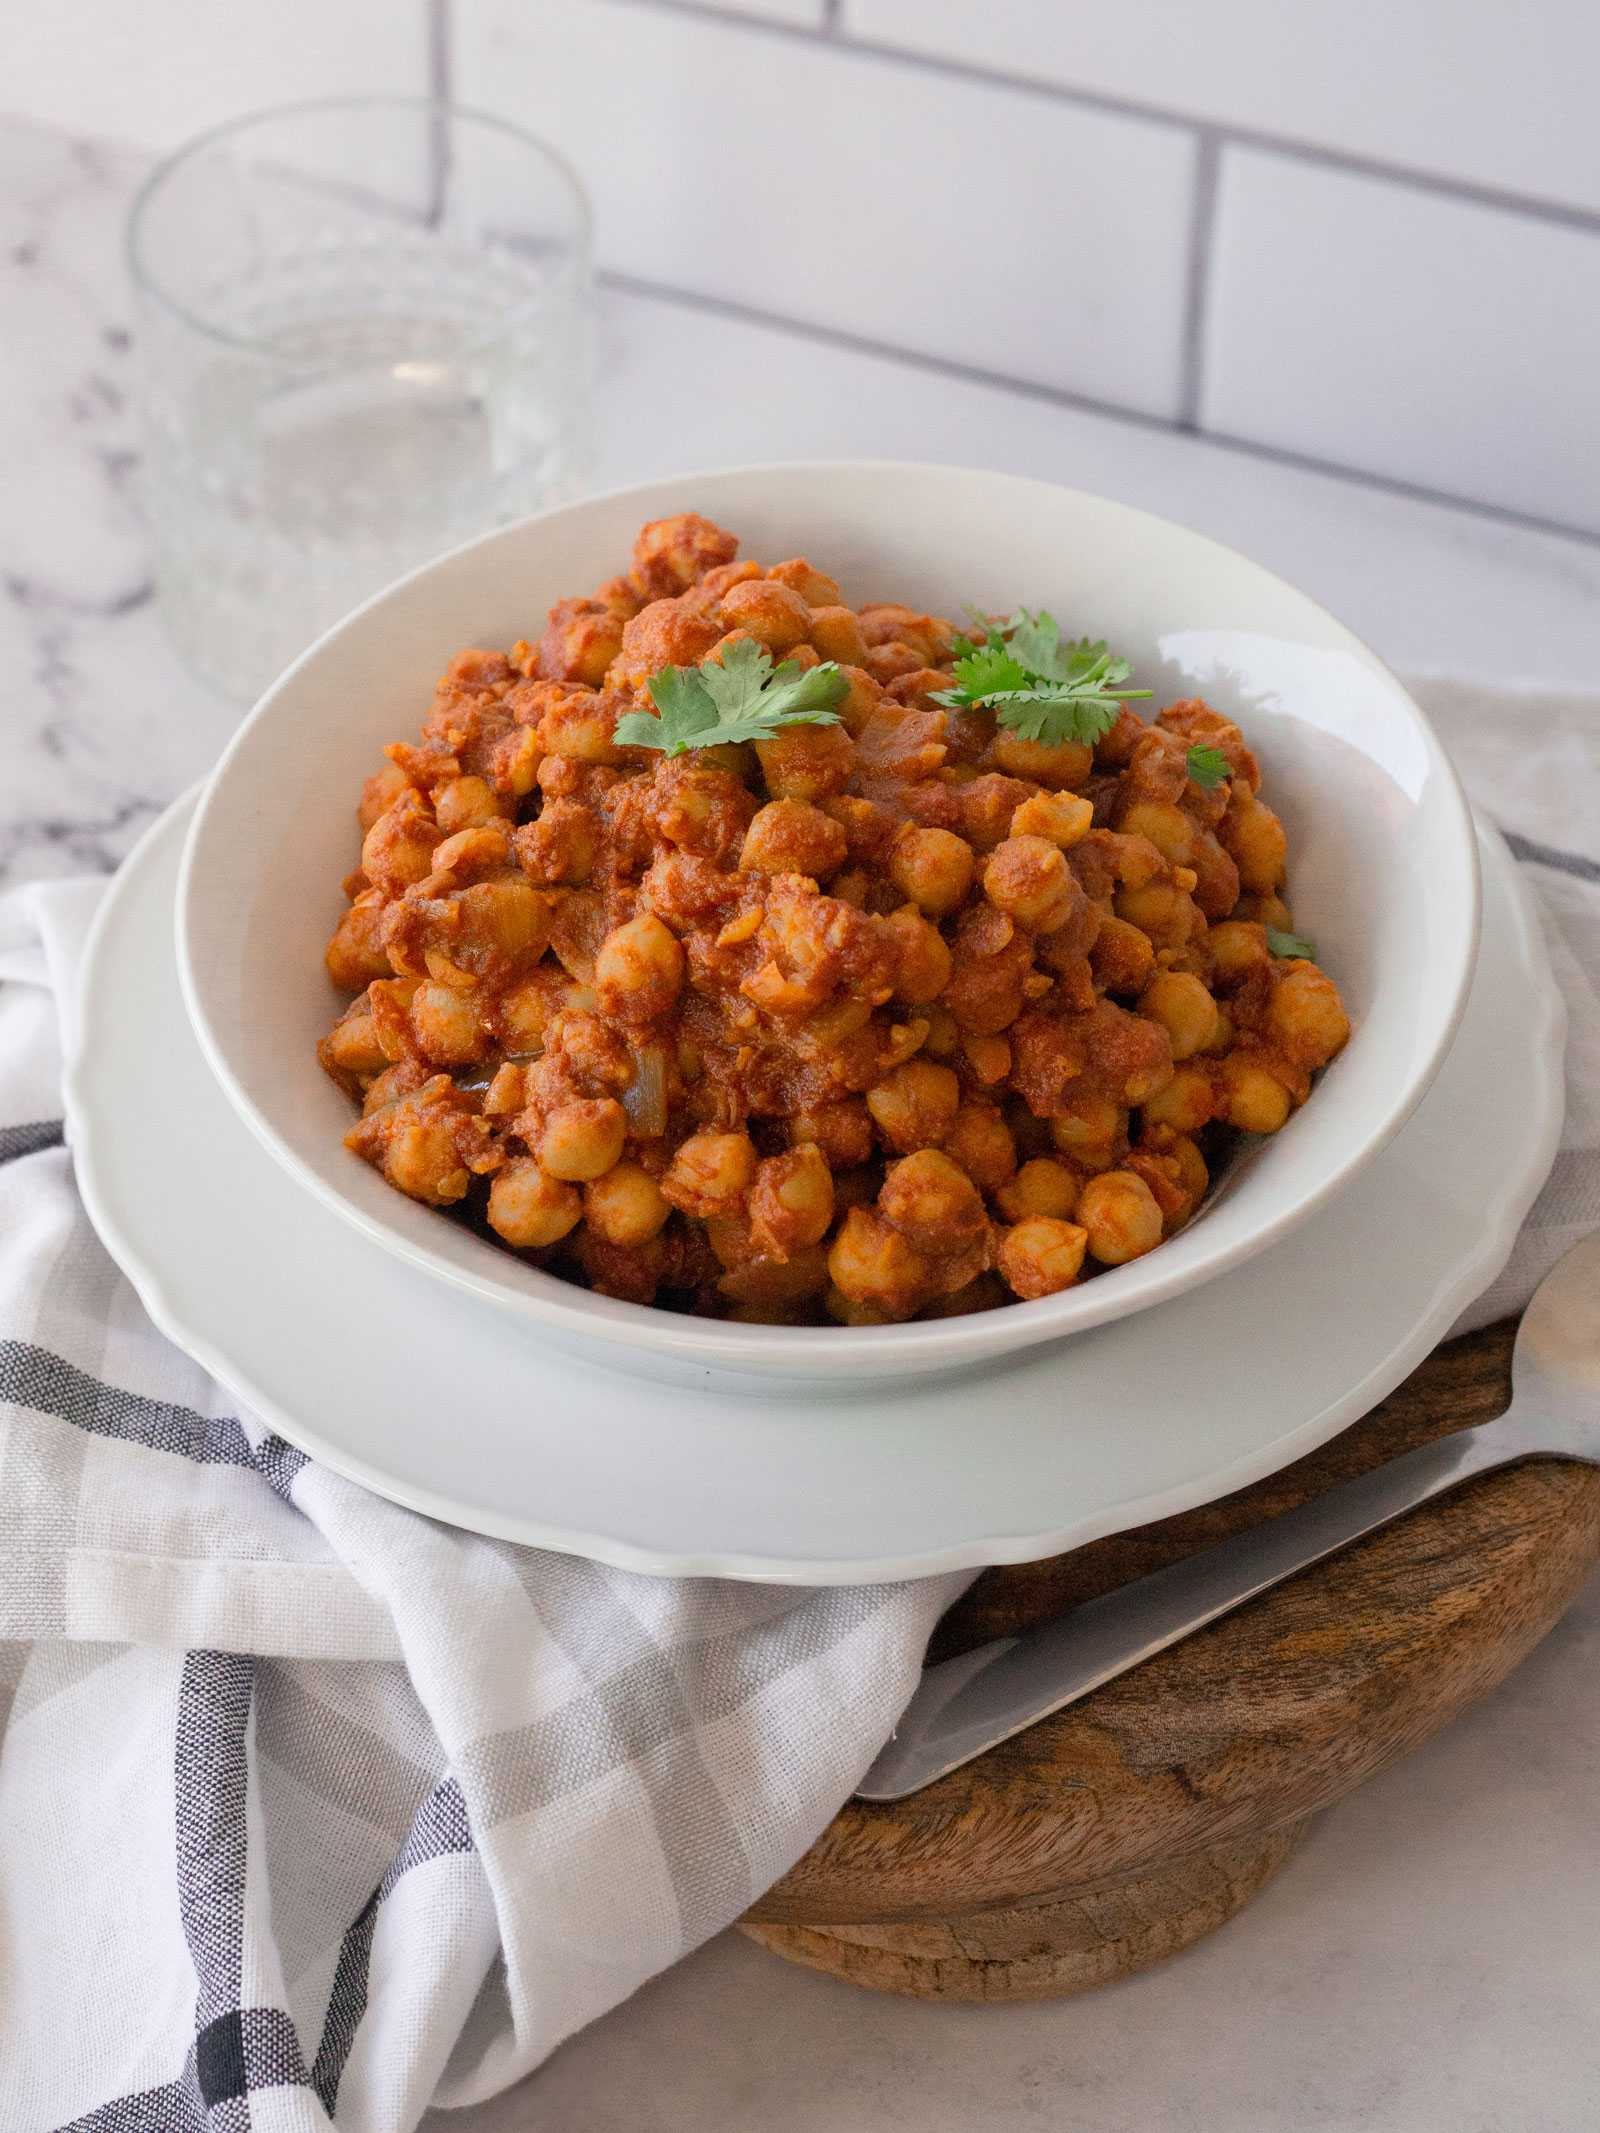 This Northern Indian dish is full of flavour and quite delicious. The combination of chickpeas and spicy tomato onion gravy will satisfy any craving. 
 